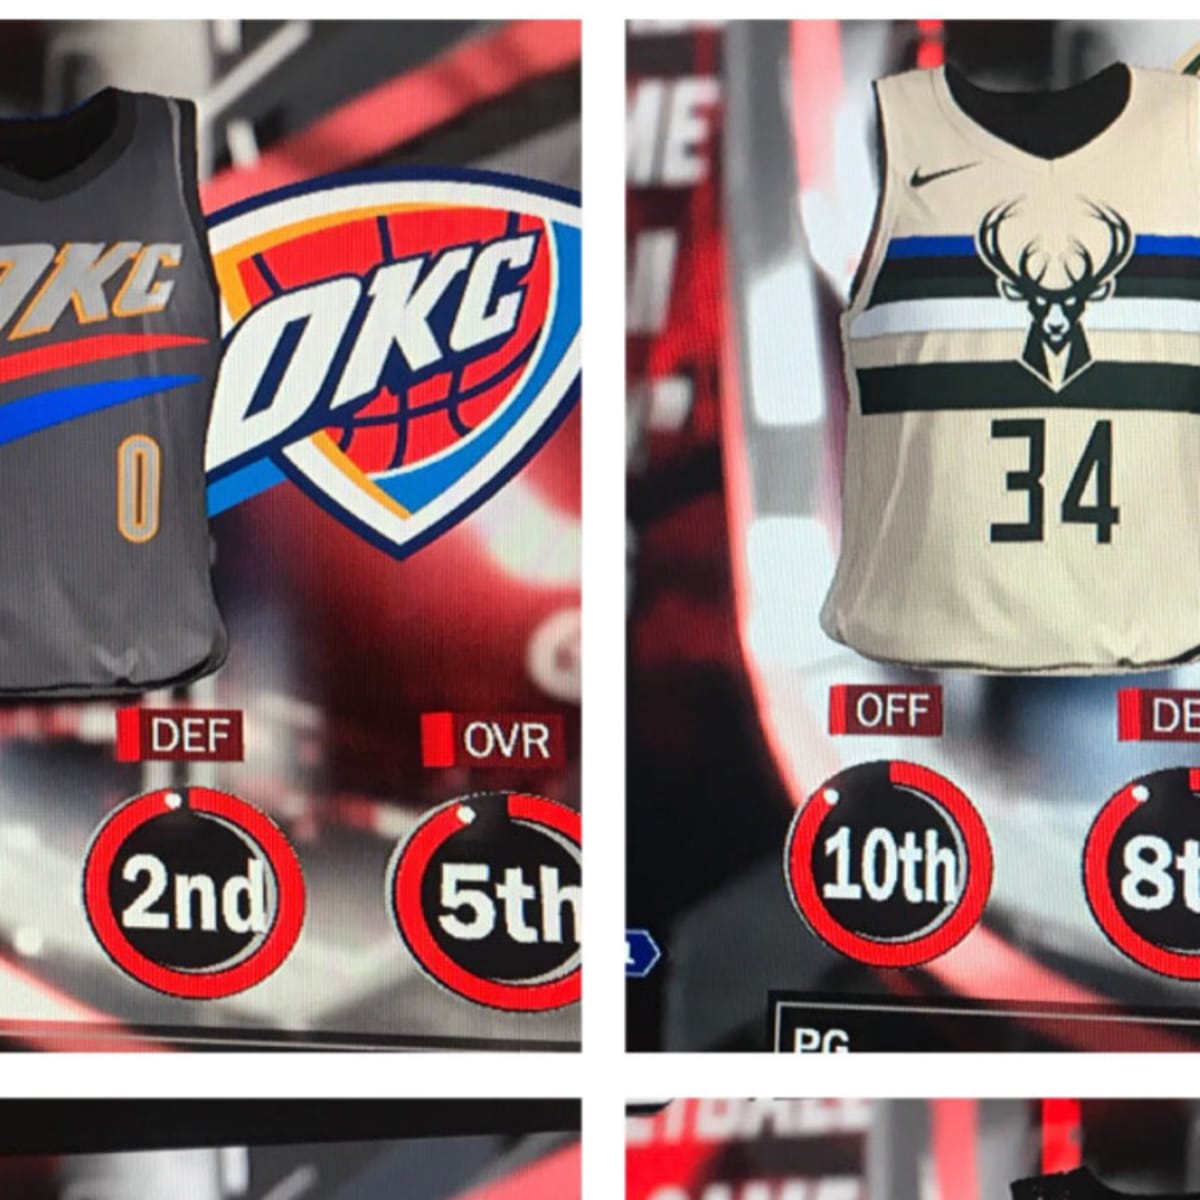 NBA 2K leaks what could be the final Spurs jersey design